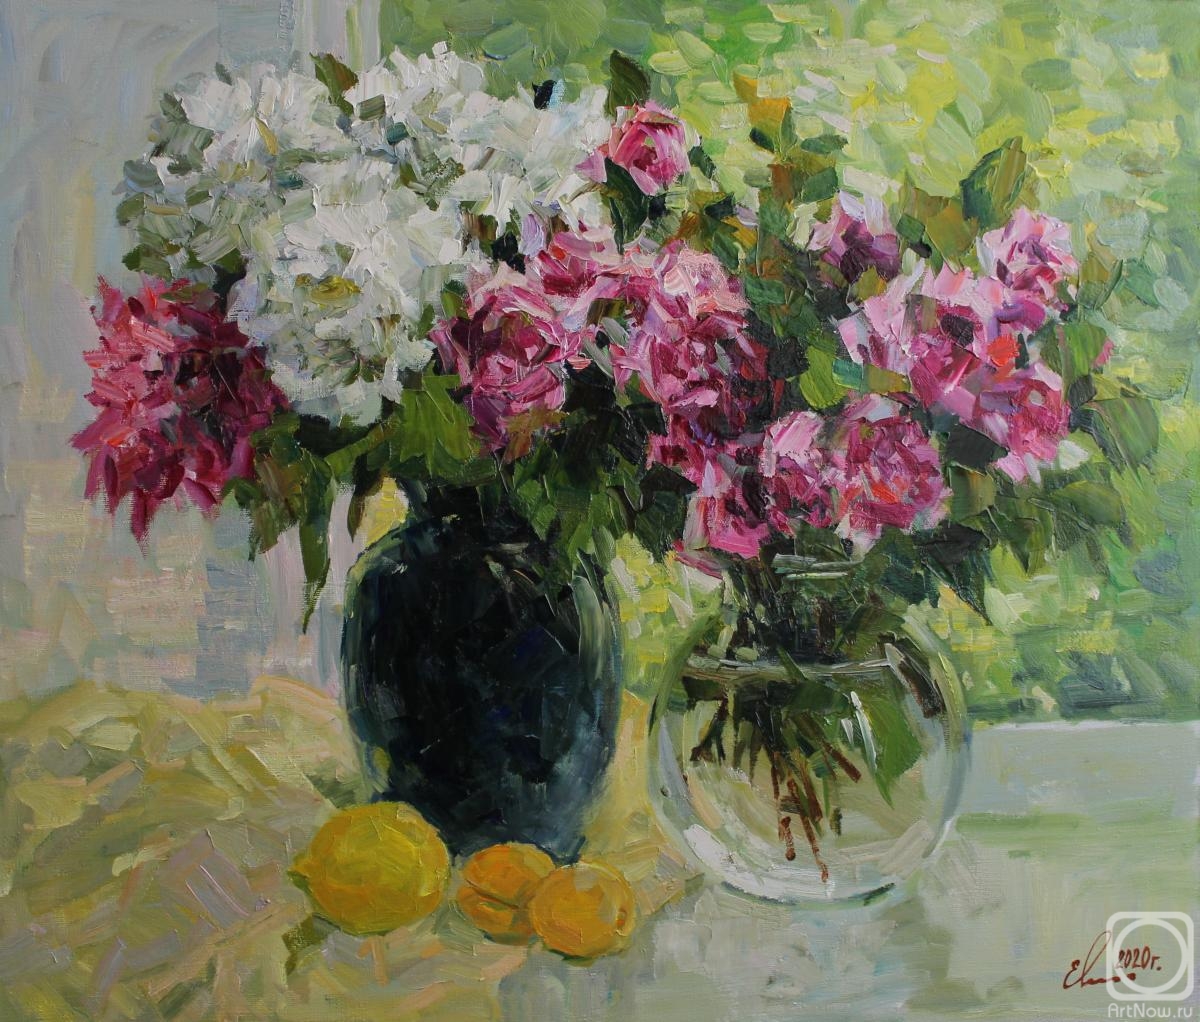 Malykh Evgeny. Peonies and roses